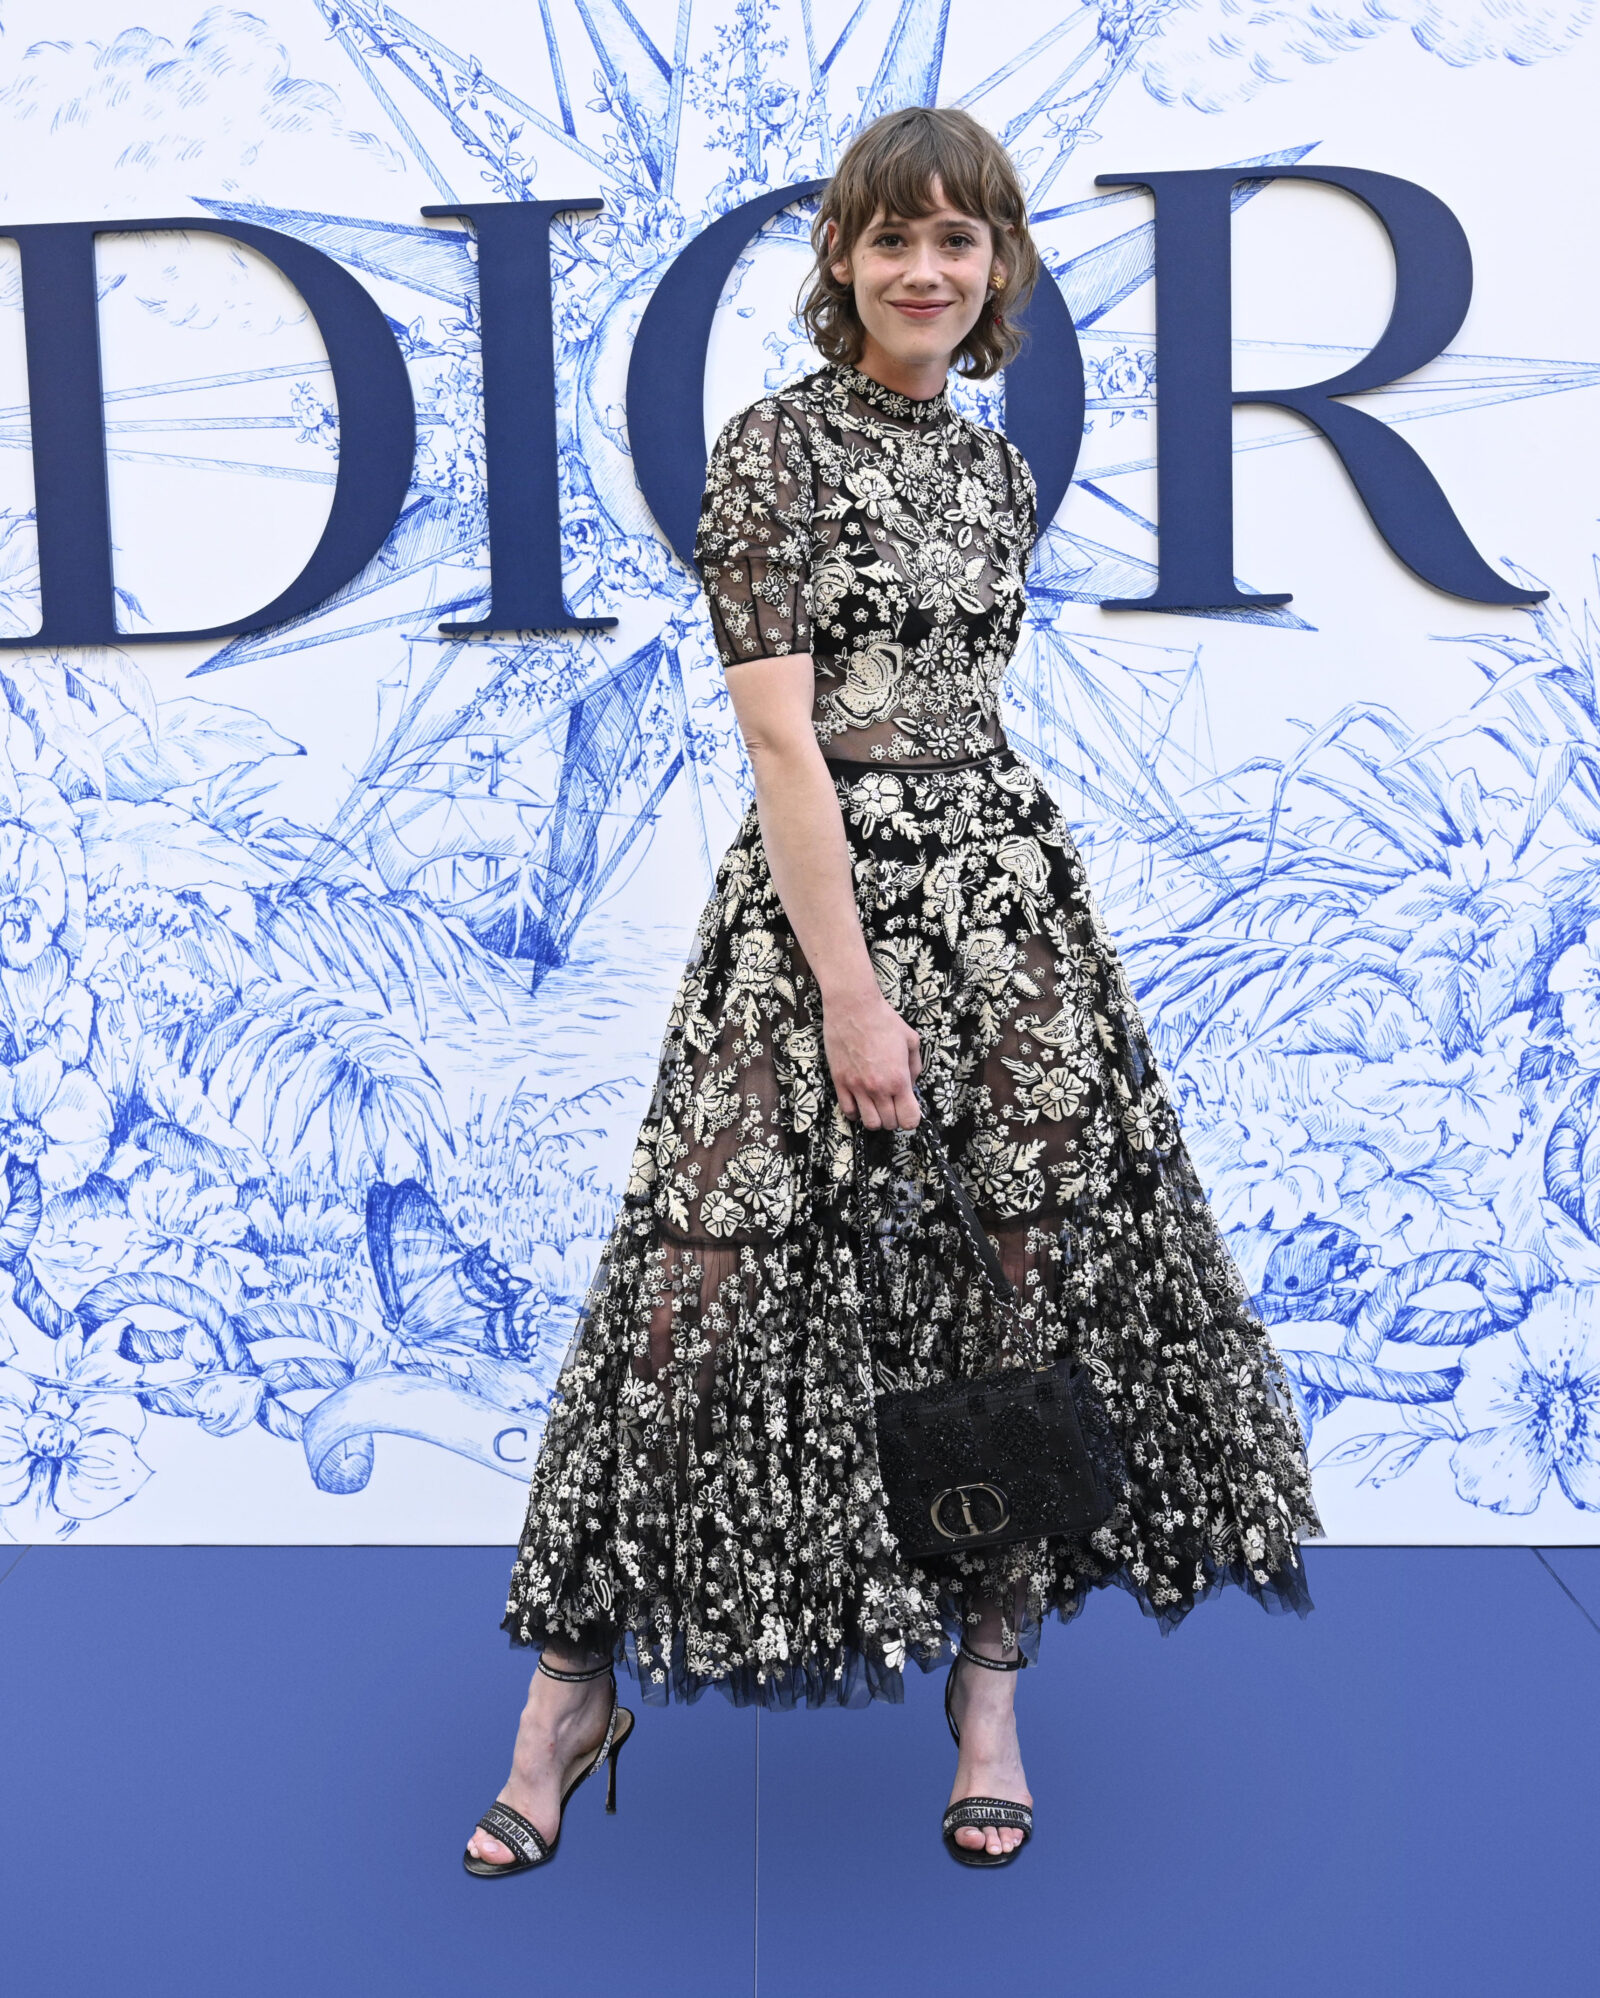 SEVILLE, SPAIN - JUNE 16: Matilde Warnier attends &quot;Crucero Collection&quot; fashion show presentation by Dior at Plaza de España on June 16, 2022 in Seville, Spain. (Photo by Carlos Alvarez/Getty Images for Dior)